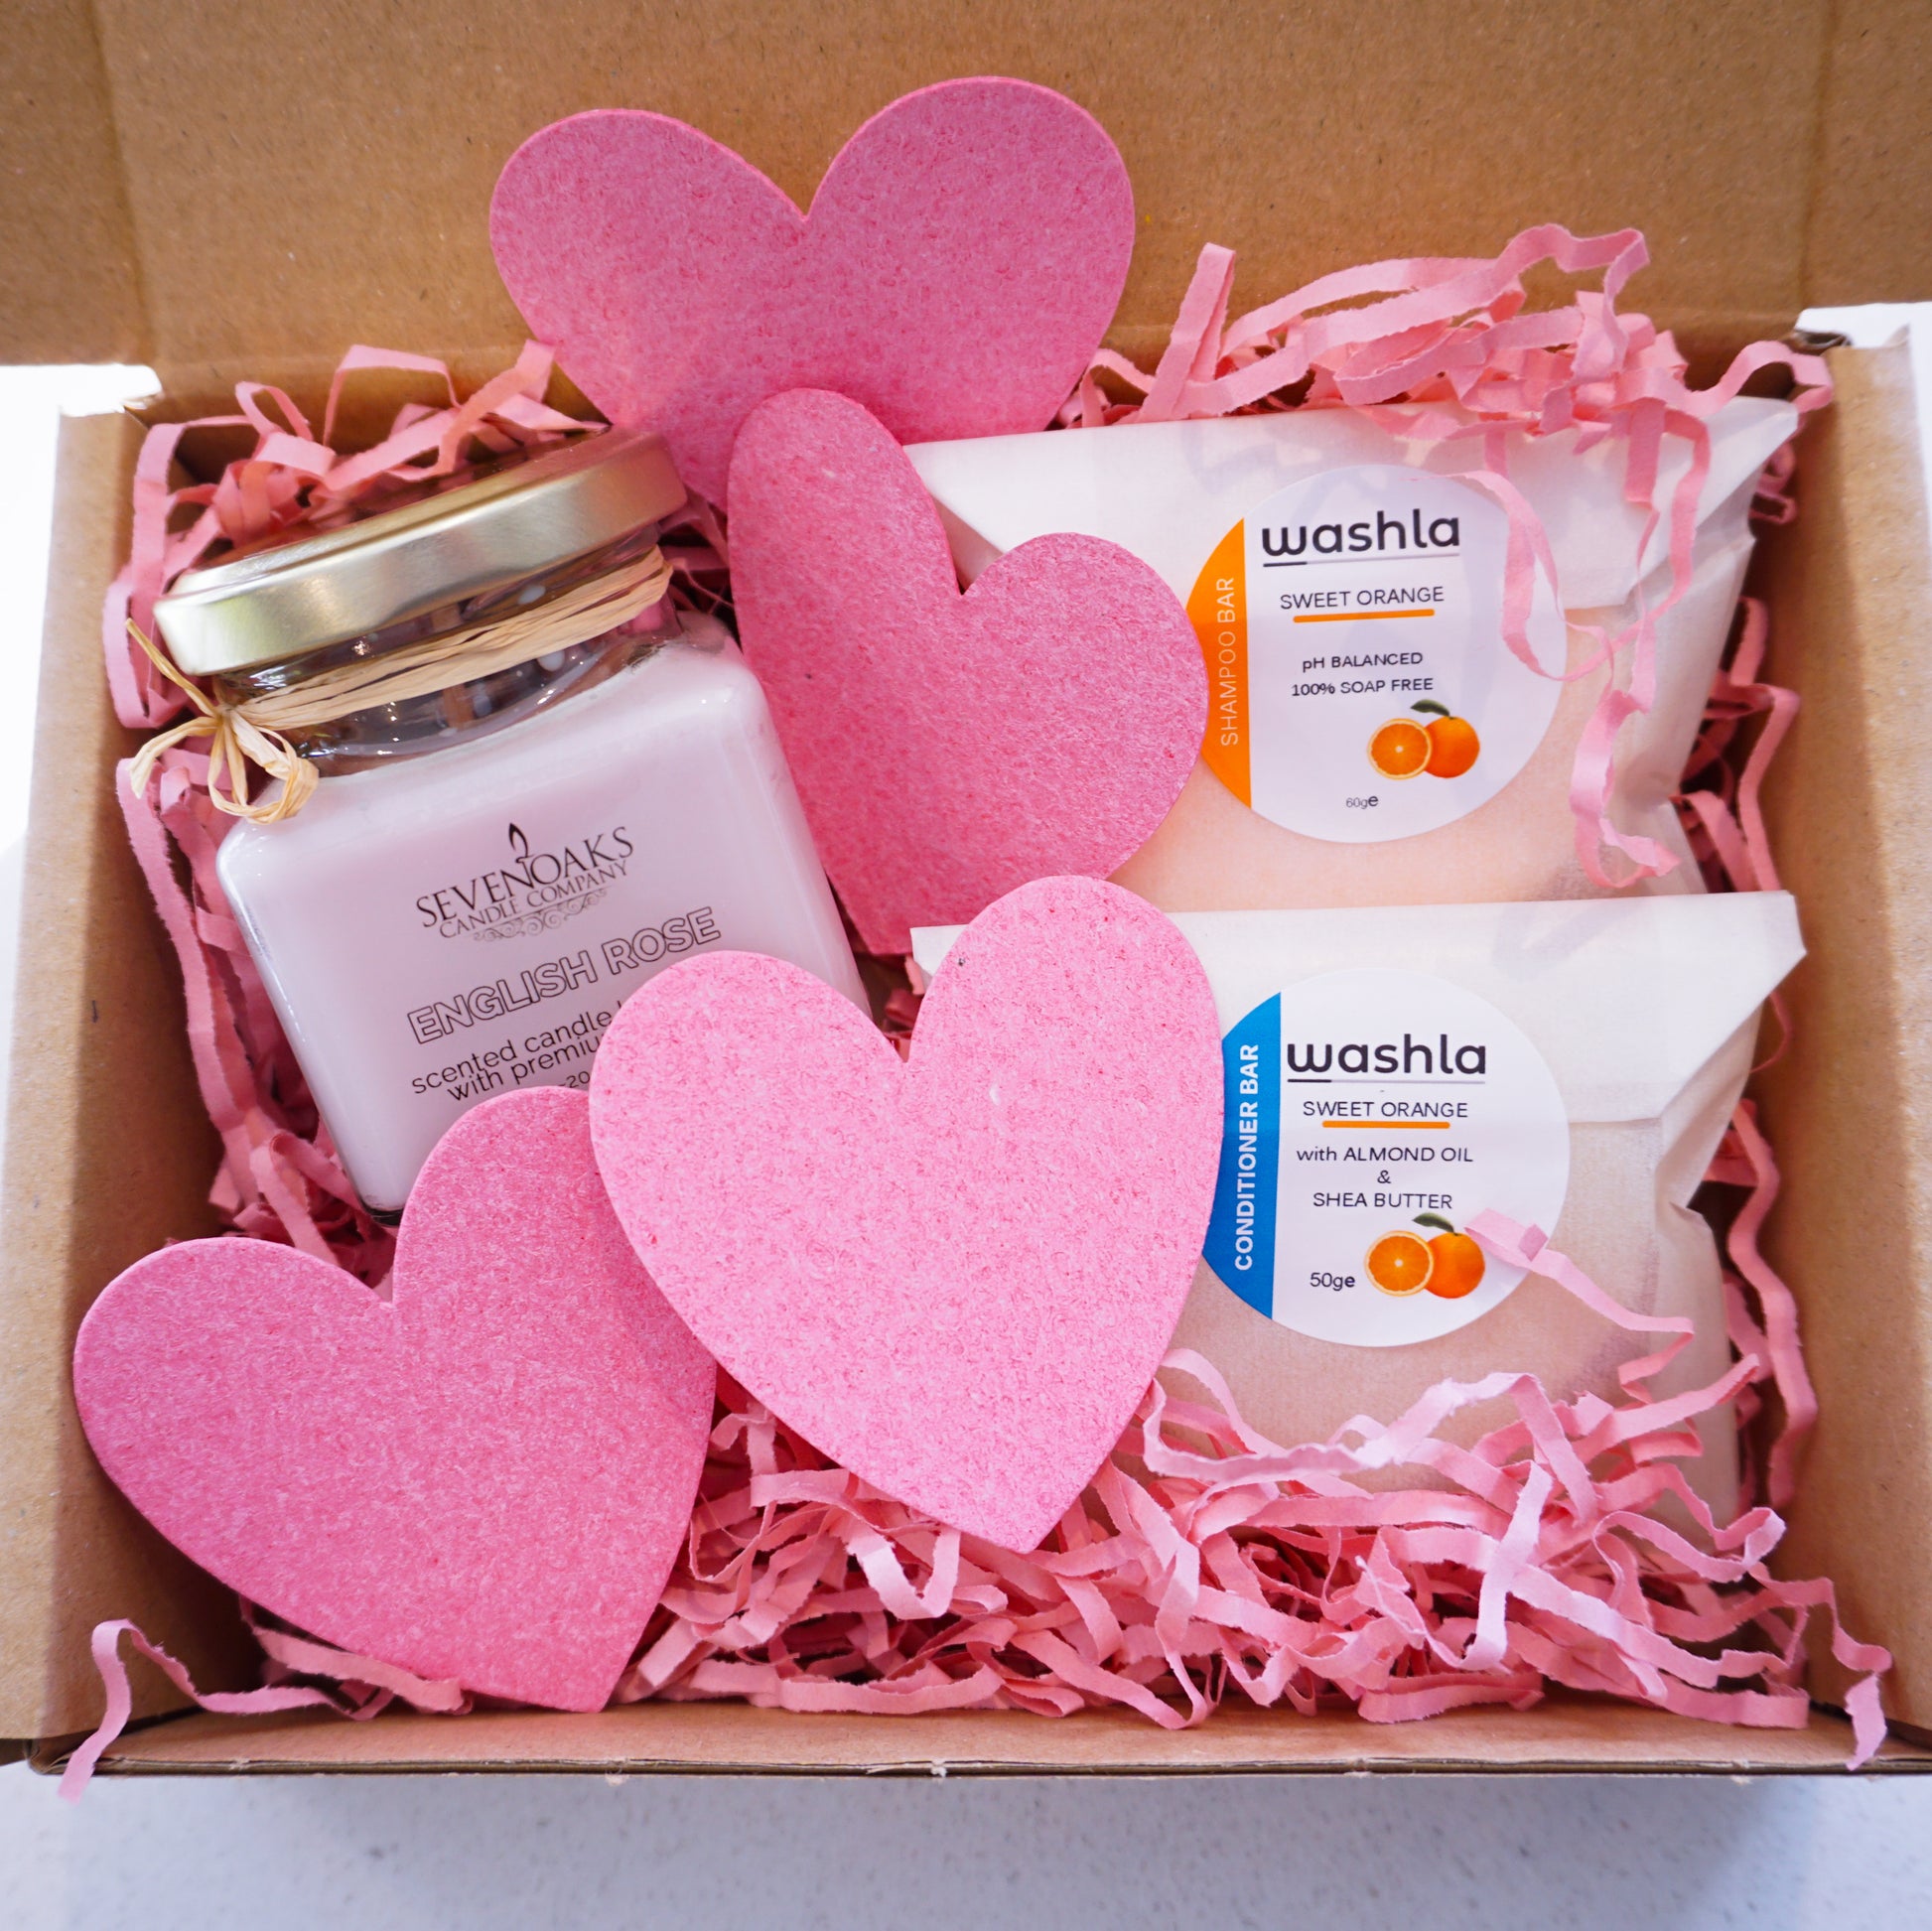 A Valentine shampoo and conditioner bars gift set